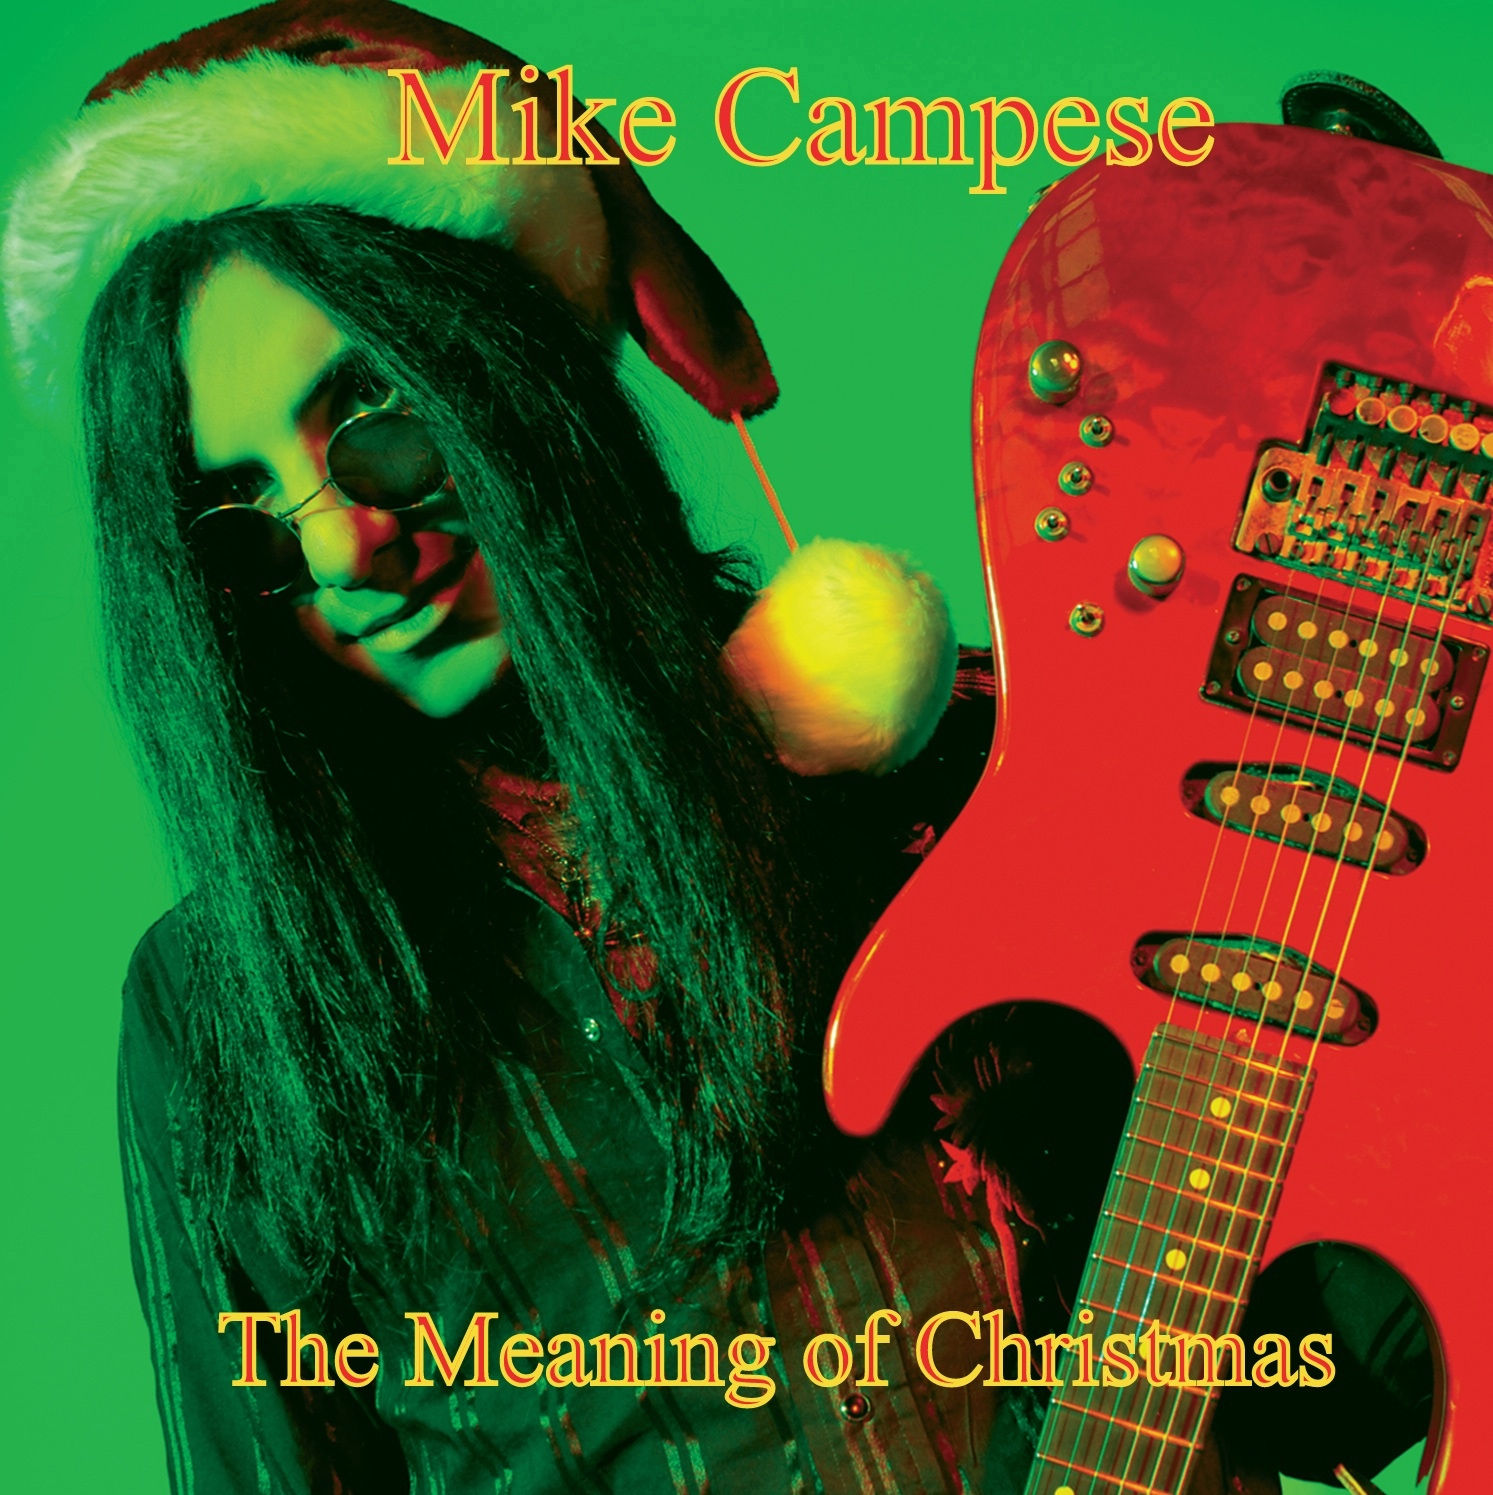 Mike Campese - "The Meaning of Christmas" cover.